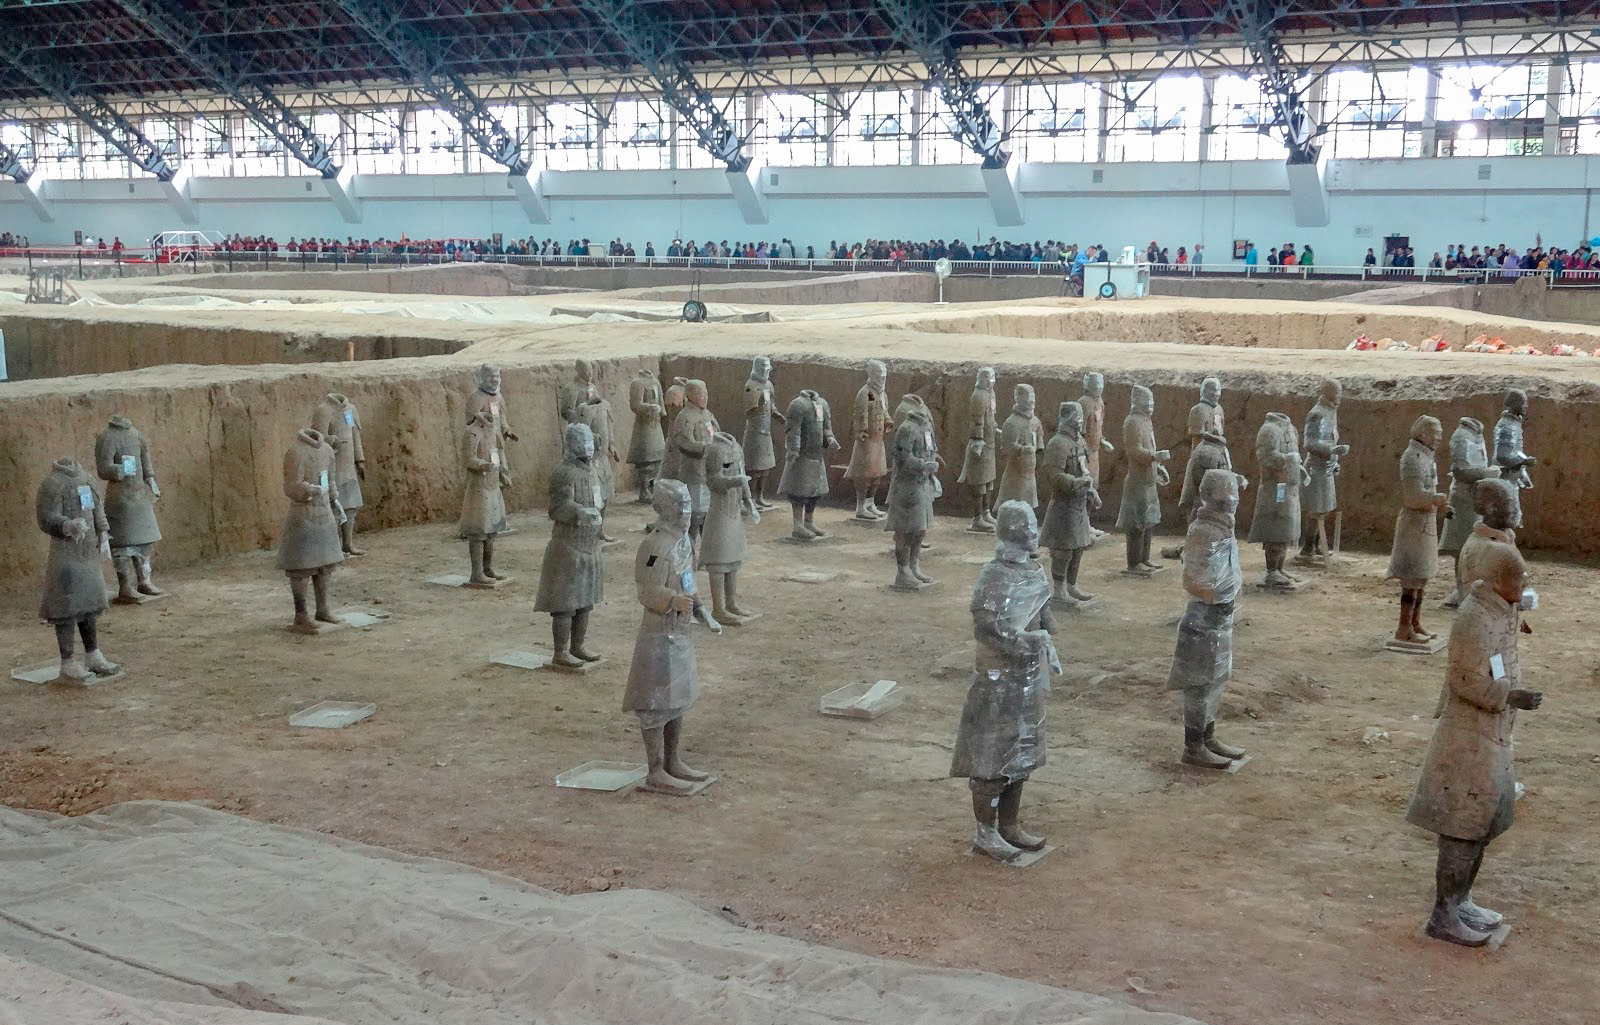 A long view of the side of the Terracotta Warriors of the Terracotta Army inside Pit 1 at Emperor Qinshihuang's Mausoleum, Xian, China